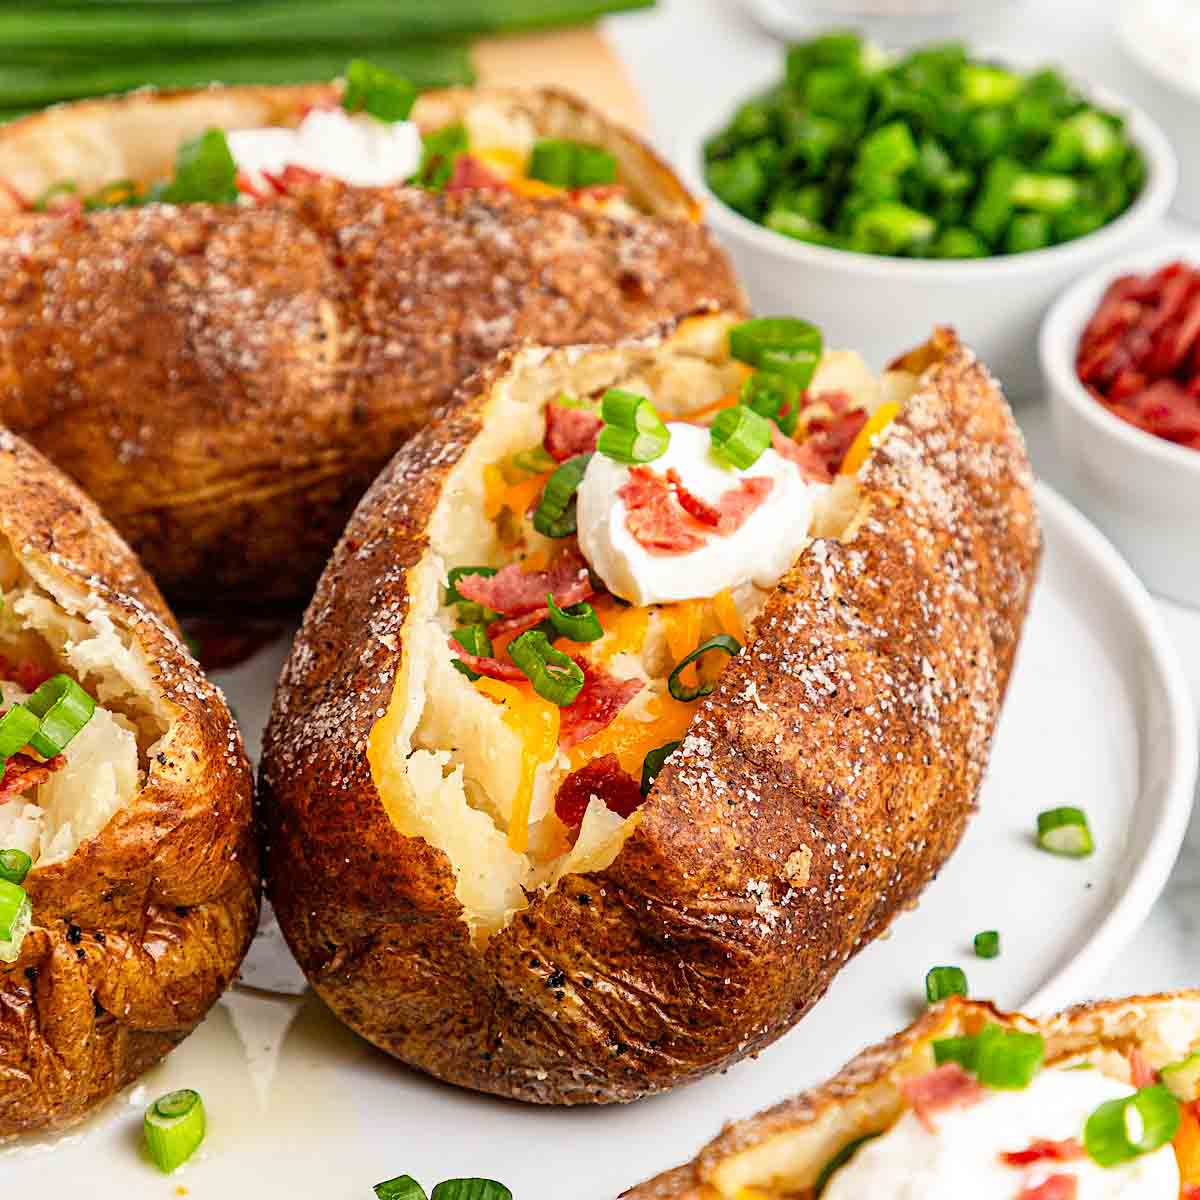 Loaded baked potatoes with bacon and cheese